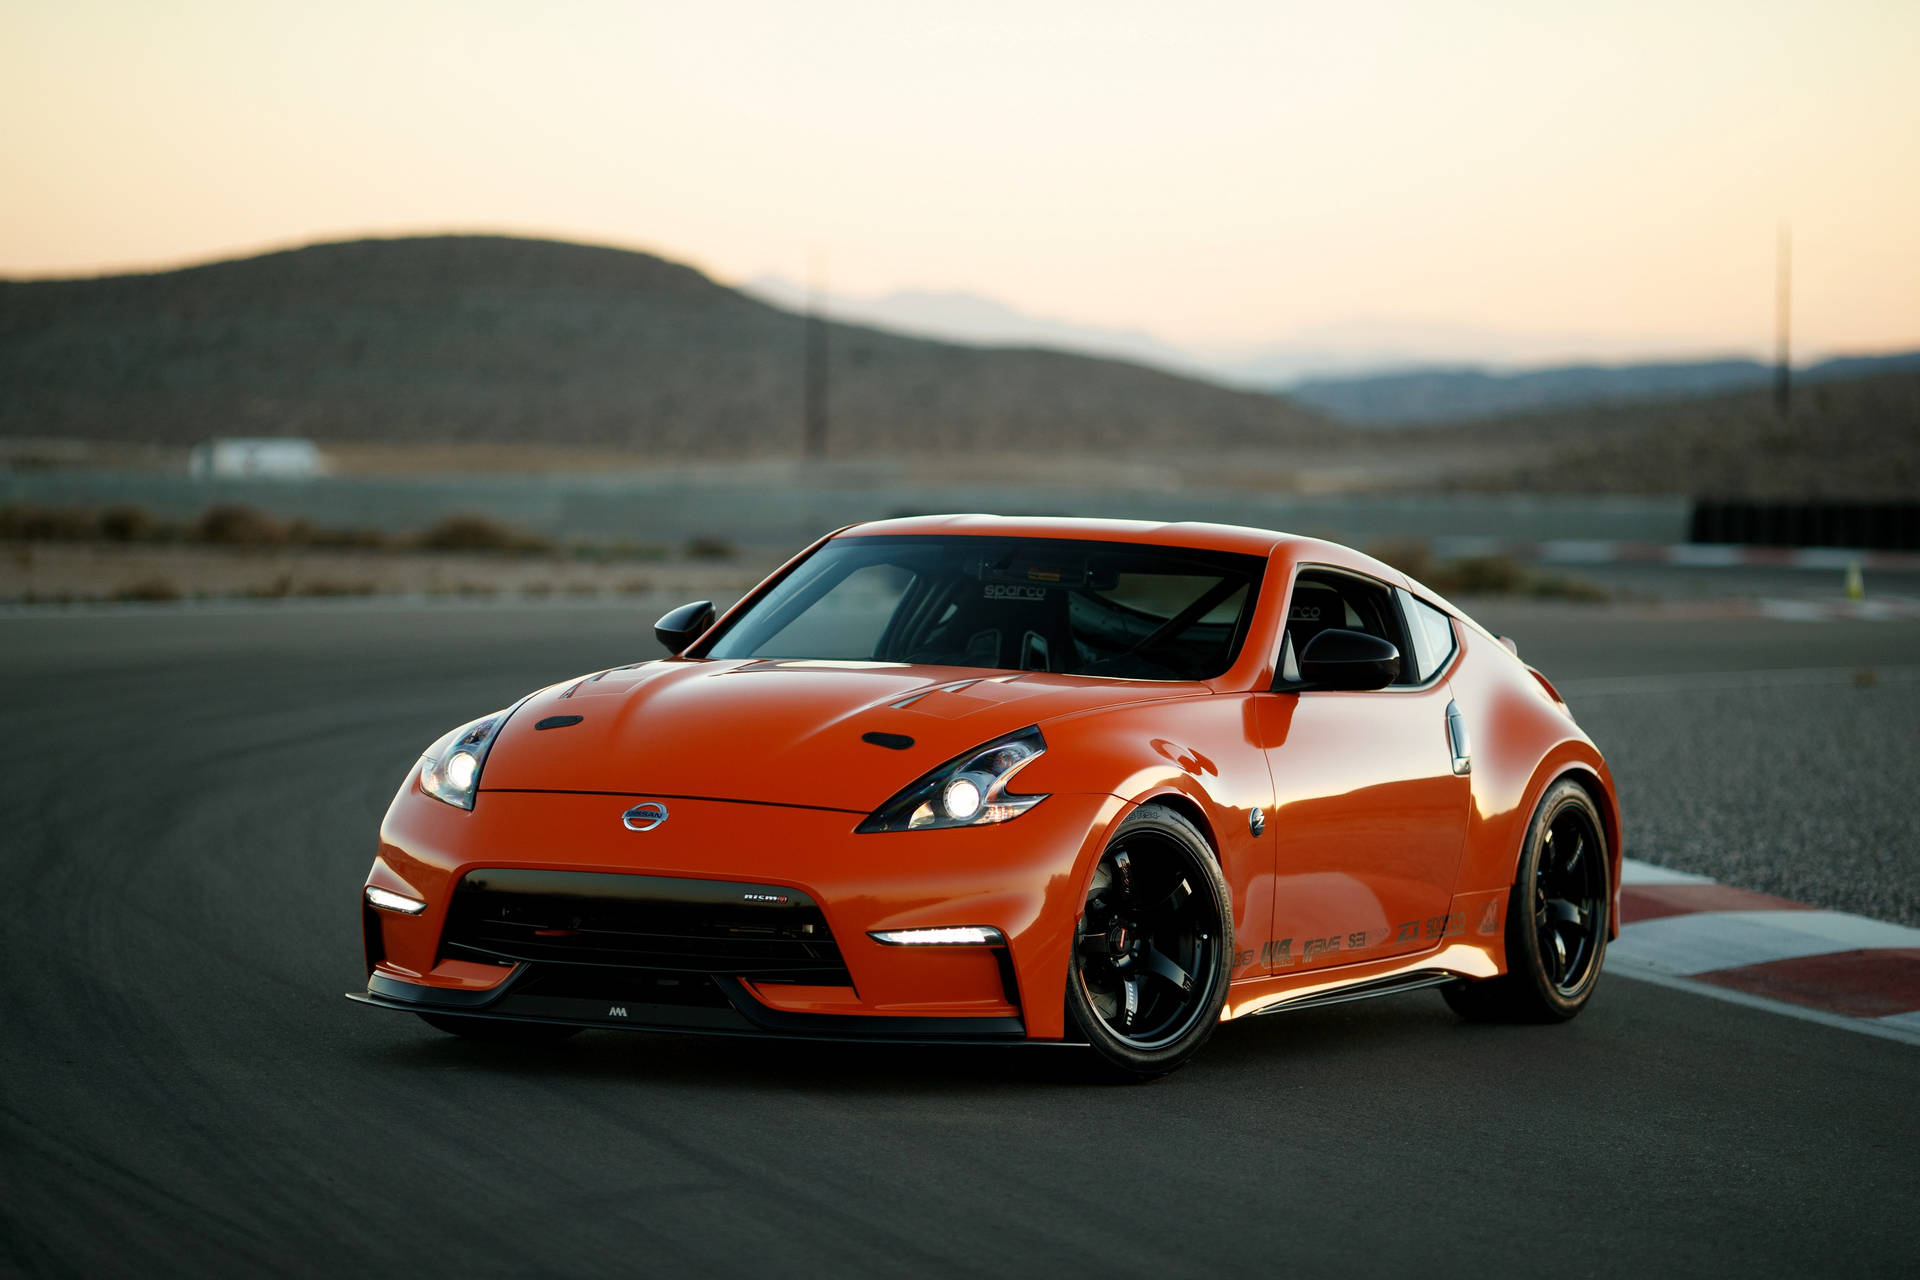 An Iconic Sports Car - The Nissan 370Z Wallpaper